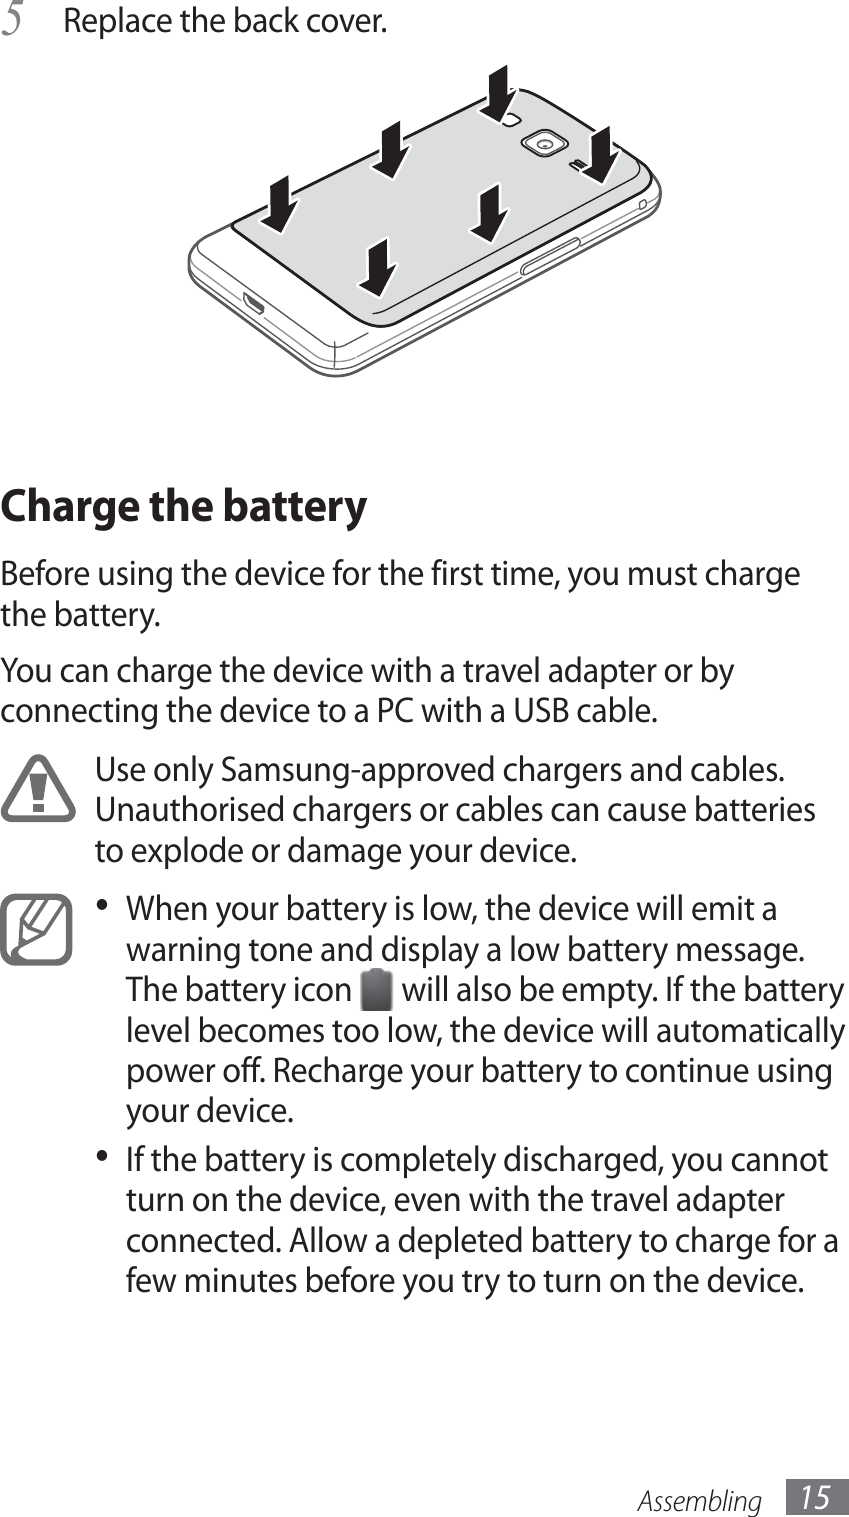 Assembling 15Replace the back cover.5 Charge the batteryBefore using the device for the first time, you must charge the battery.You can charge the device with a travel adapter or by connecting the device to a PC with a USB cable.Use only Samsung-approved chargers and cables. Unauthorised chargers or cables can cause batteries to explode or damage your device.When your battery is low, the device will emit a • warning tone and display a low battery message. The battery icon   will also be empty. If the battery level becomes too low, the device will automatically power off. Recharge your battery to continue using your device.If the battery is completely discharged, you cannot • turn on the device, even with the travel adapter connected. Allow a depleted battery to charge for a few minutes before you try to turn on the device.